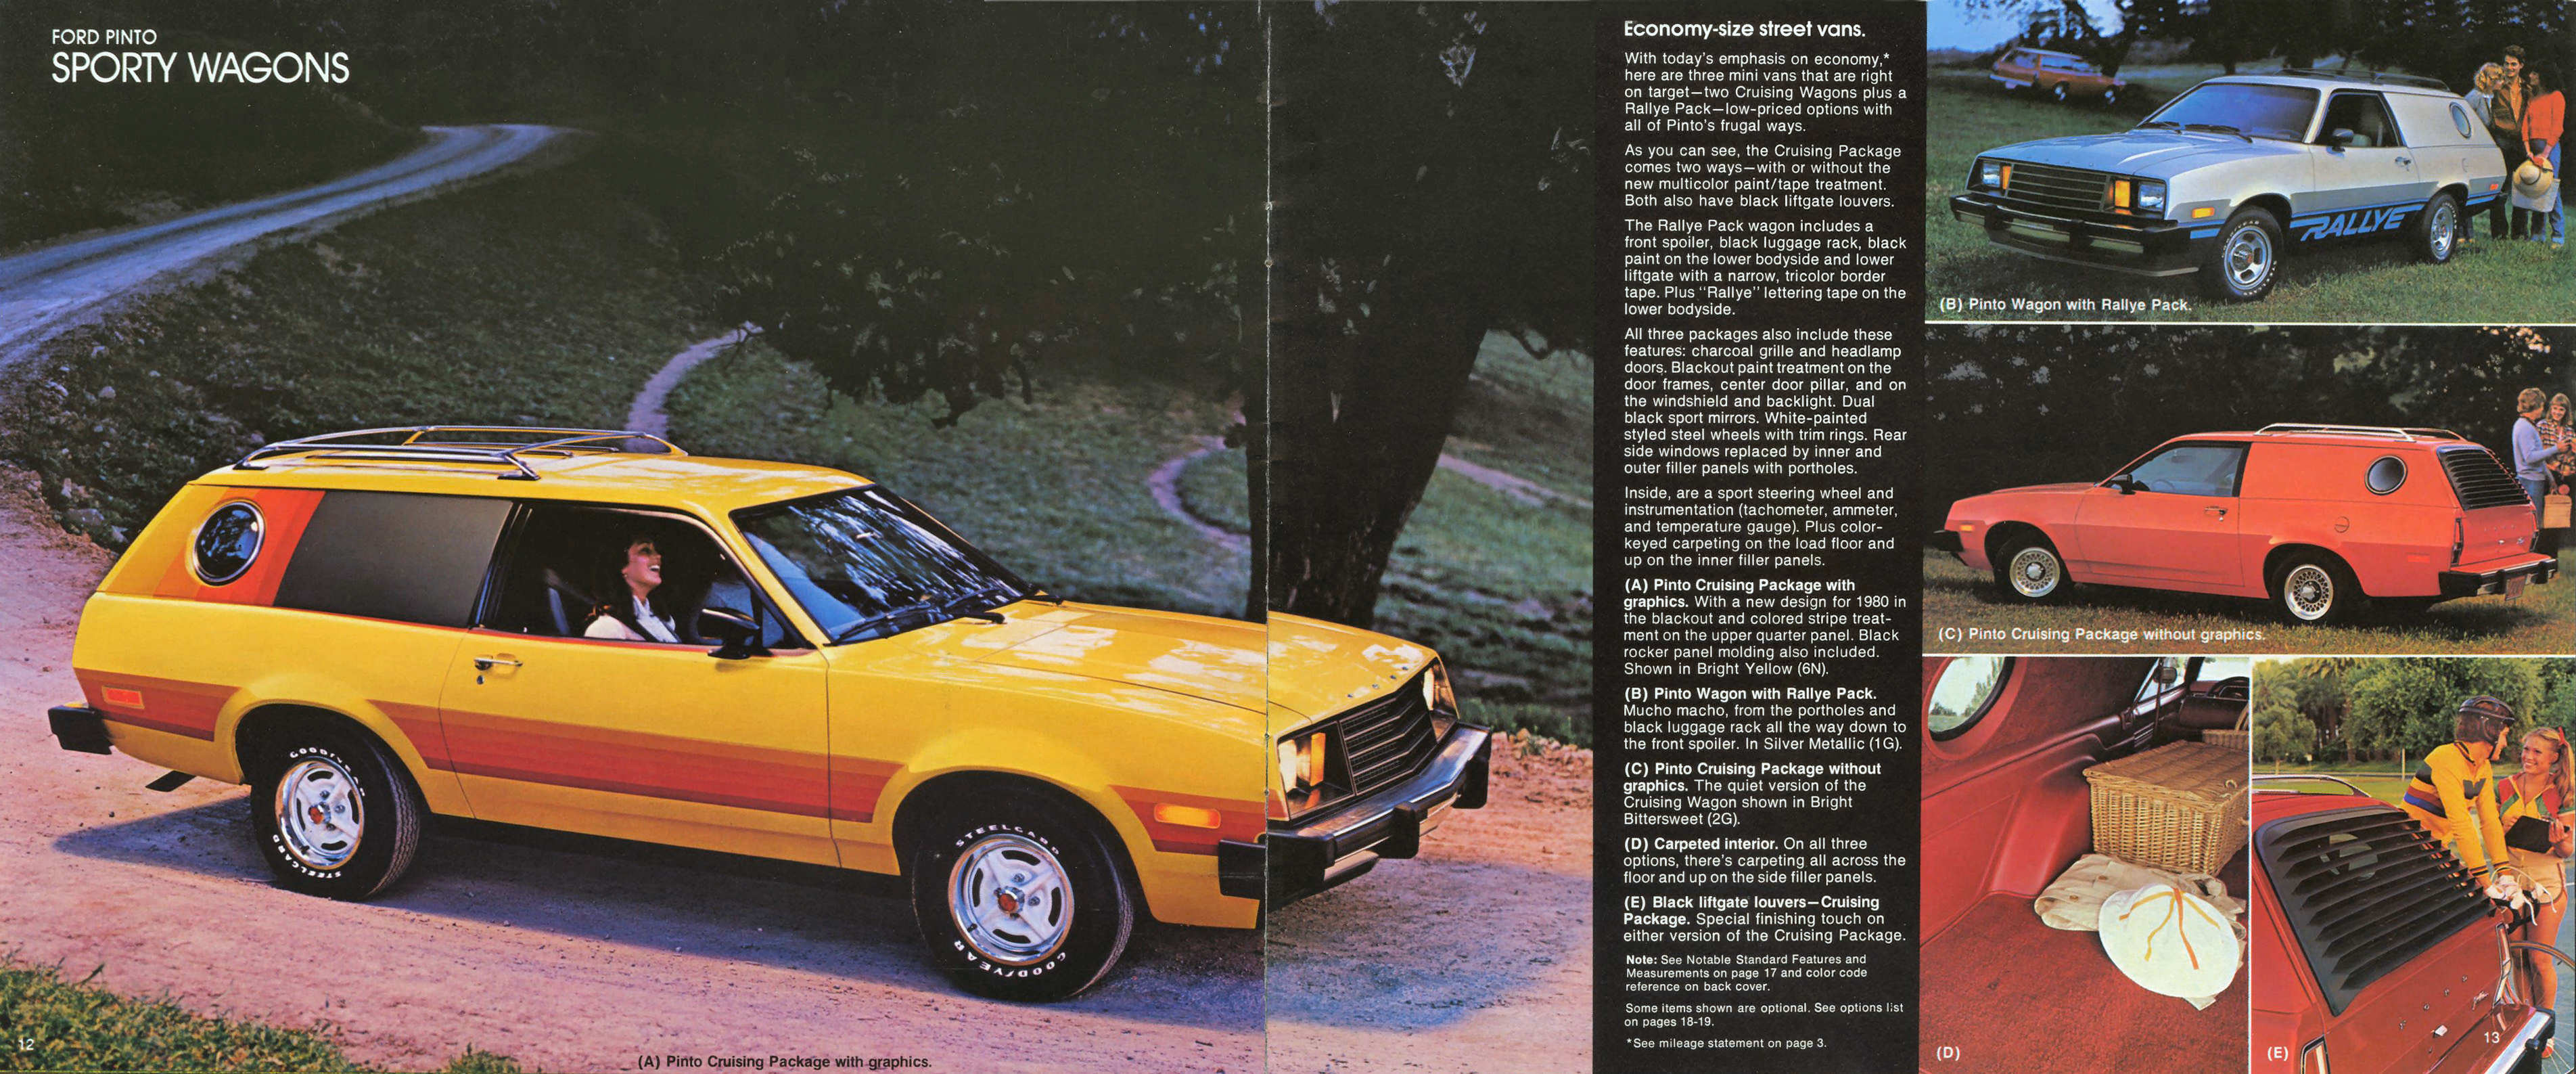 1980_Ford_Pinto-12-13